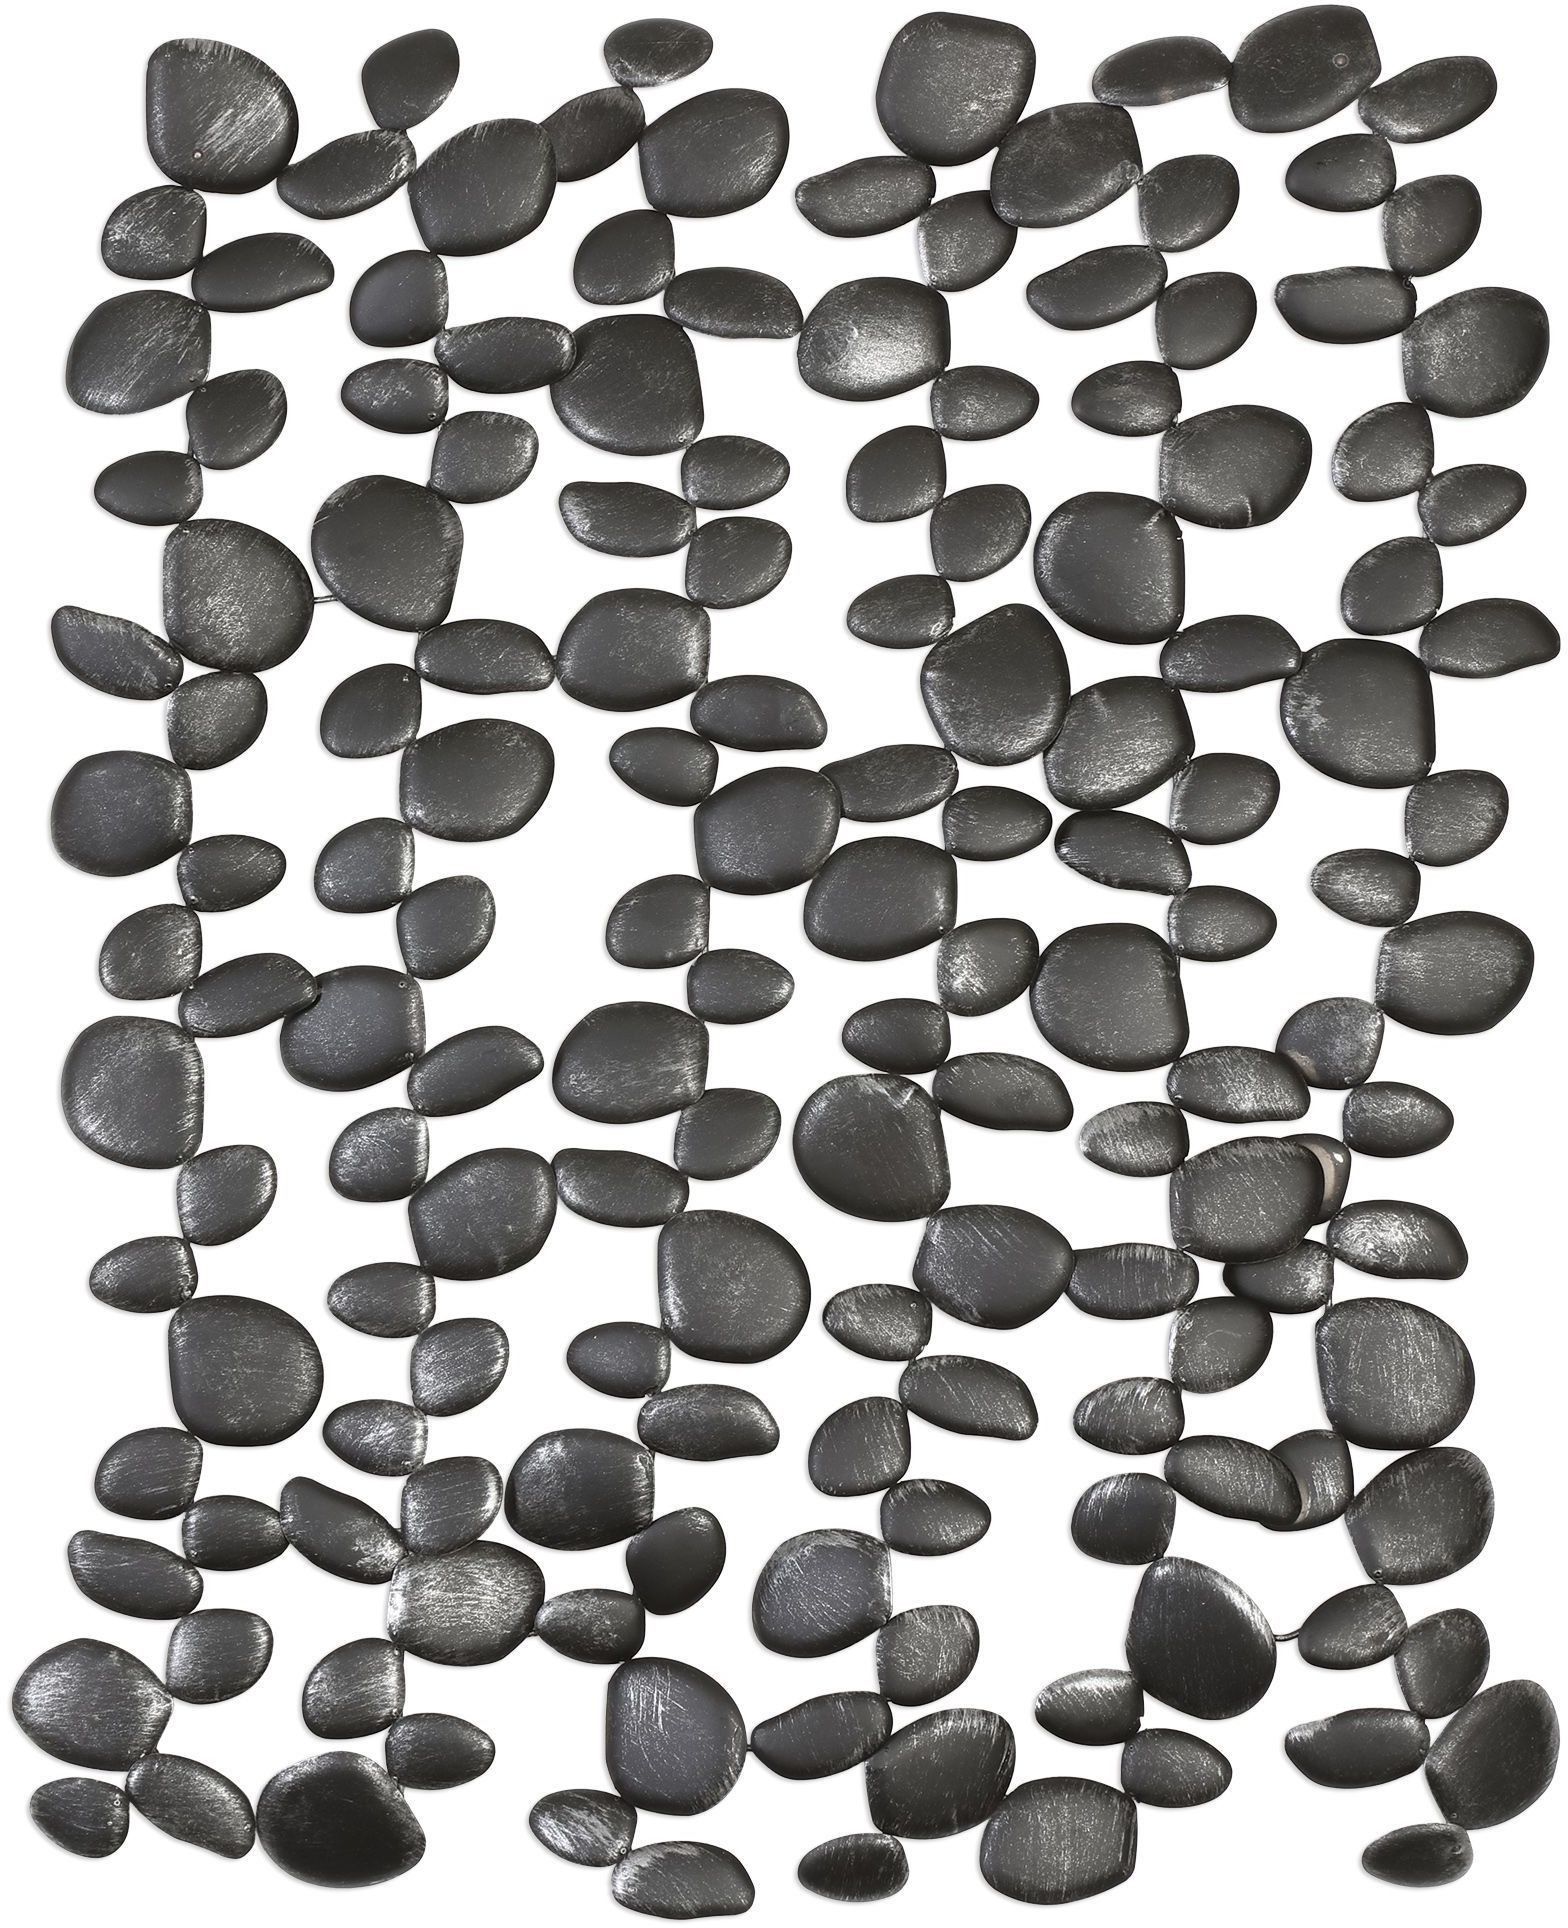 Skipping Stones Forged Iron Wall Art From Uttermost | Coleman Furniture Intended For 2018 Stones Wall Art (Gallery 20 of 20)